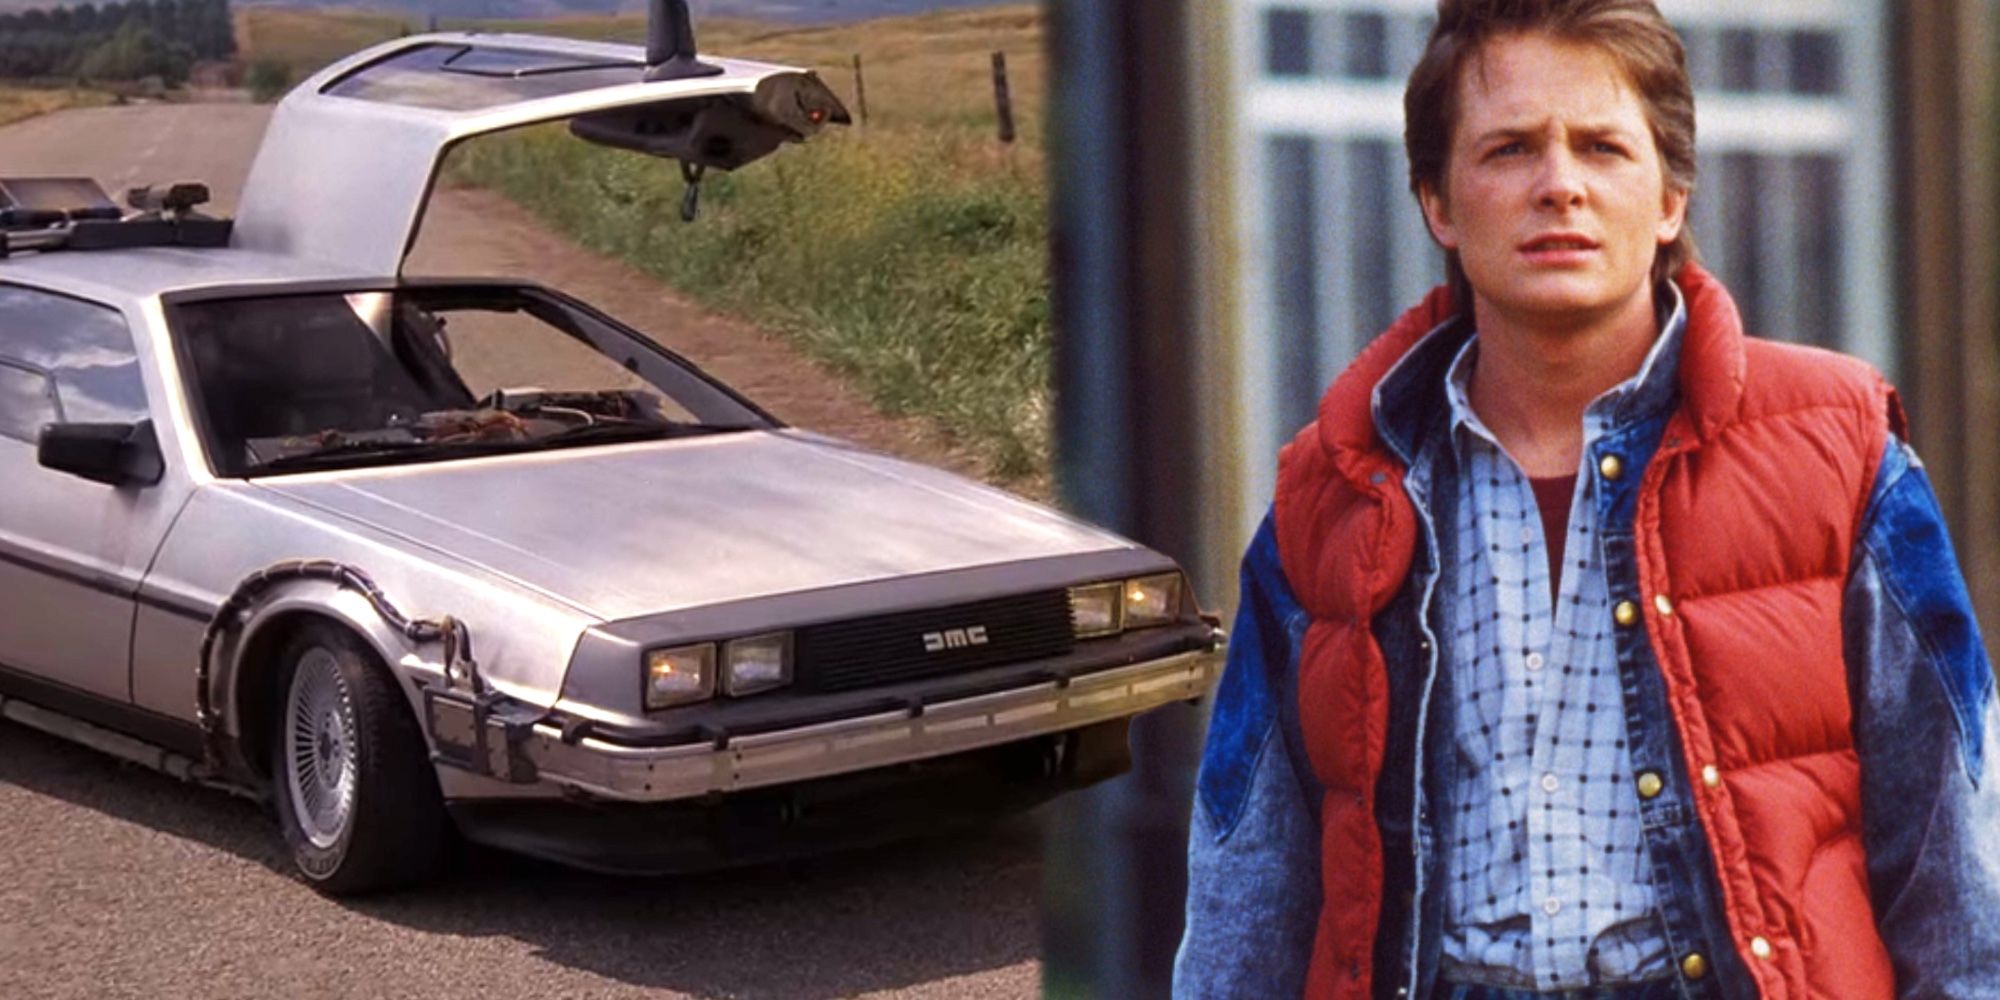 Michael J Fox as Marty Mcfly in Back to the Future with the DeLorean